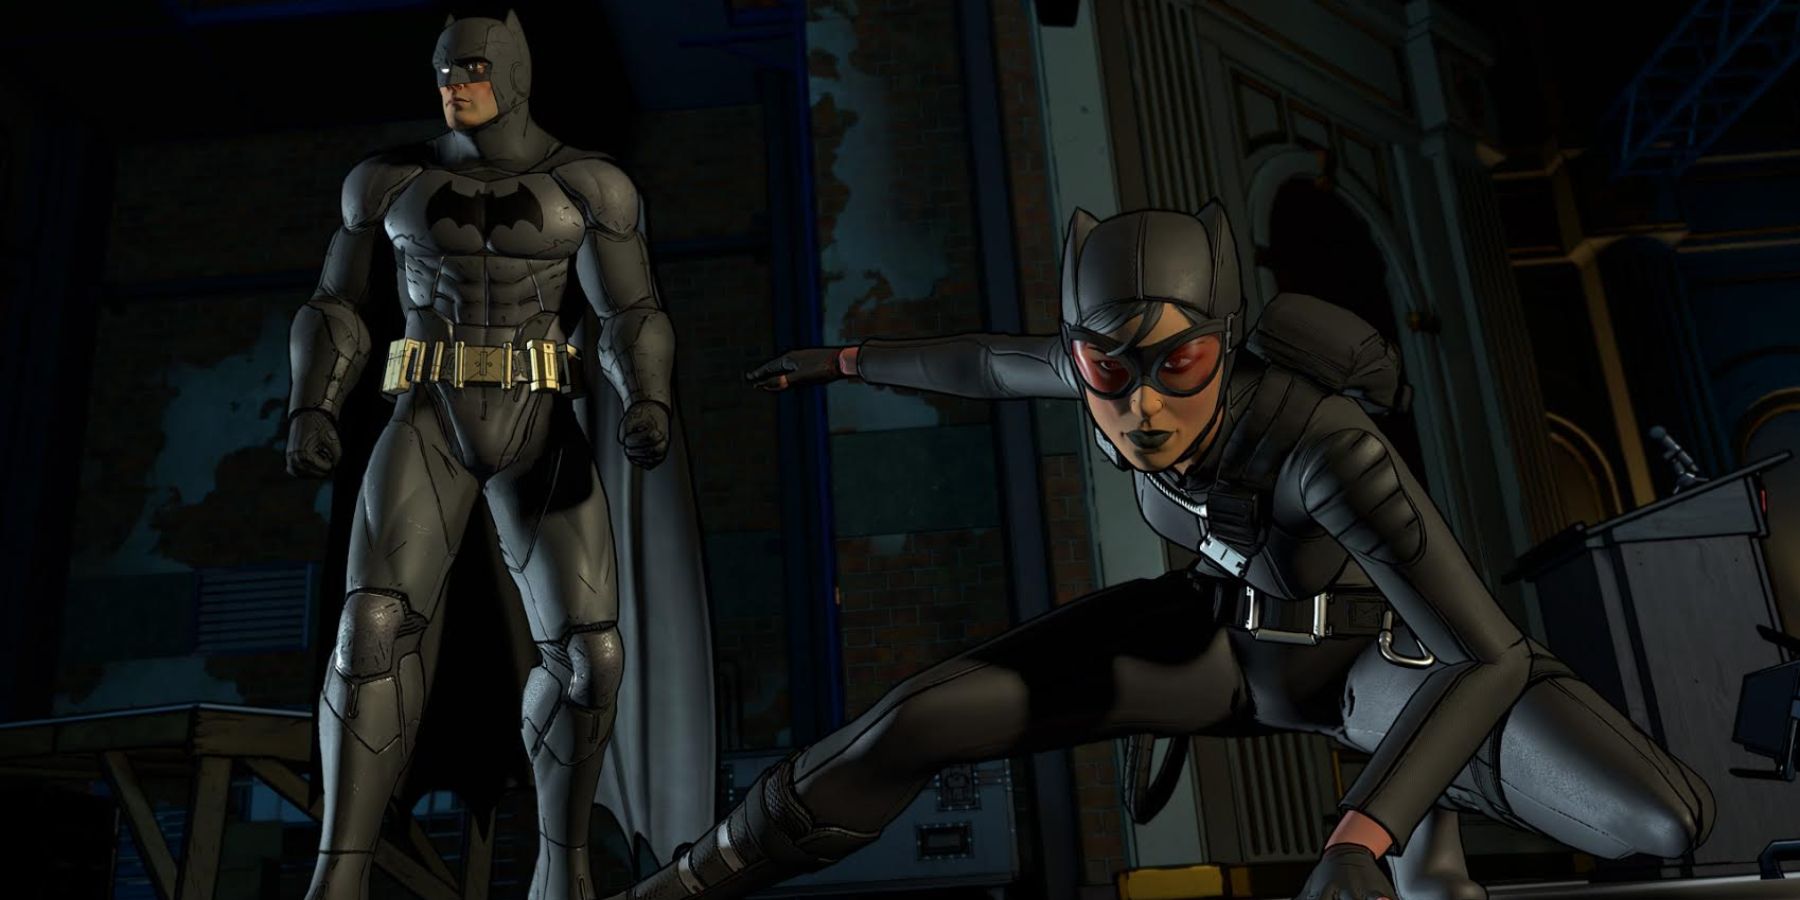 Catwoman and Batman in Telltale